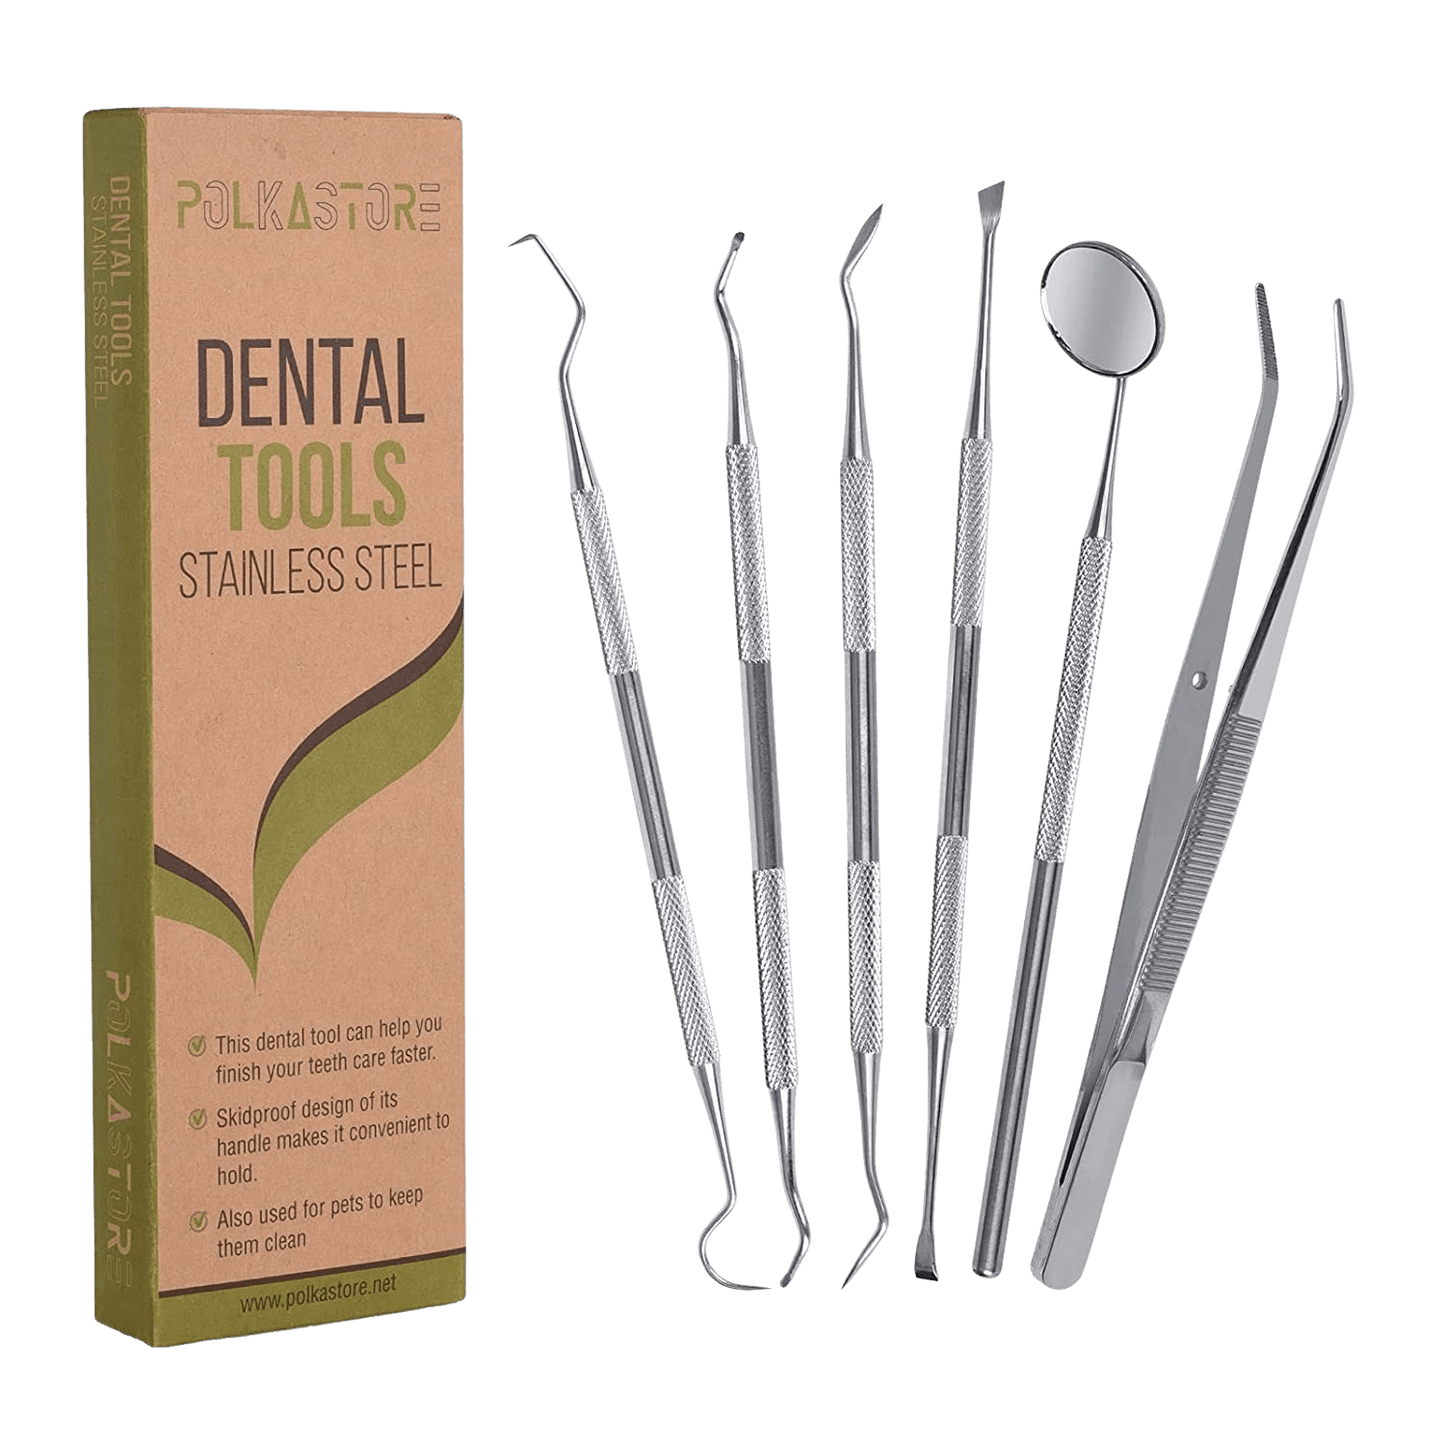 Dental Tools, 6 Pack Teeth Cleaning Tools Stainless Steel Dental Scraper, Scaler Pick Hygiene Set with Mouth Mirror, Tweezer Kit for Dentist, Personal Using, Pets - Tooth Tartar Plaque Scraper Remover | Decor Gifts and More